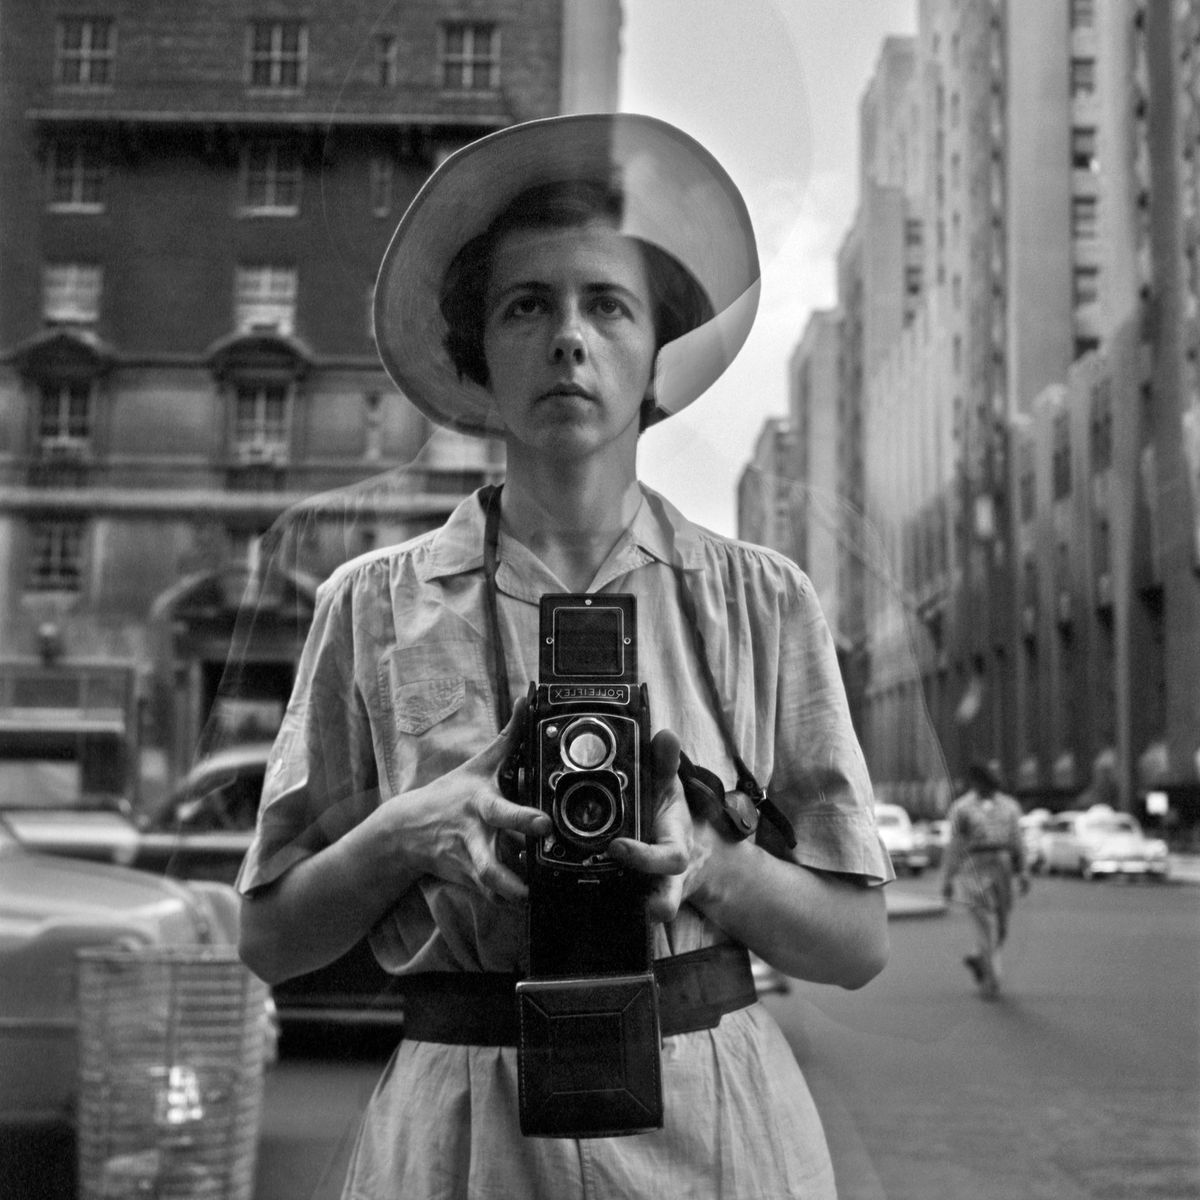 Vivian Maier, Self-Portrait, New York, NY, 1954 © Estate of Vivian Maier, Courtesy of Maloof Collection and Howard Greenberg Gallery, NY